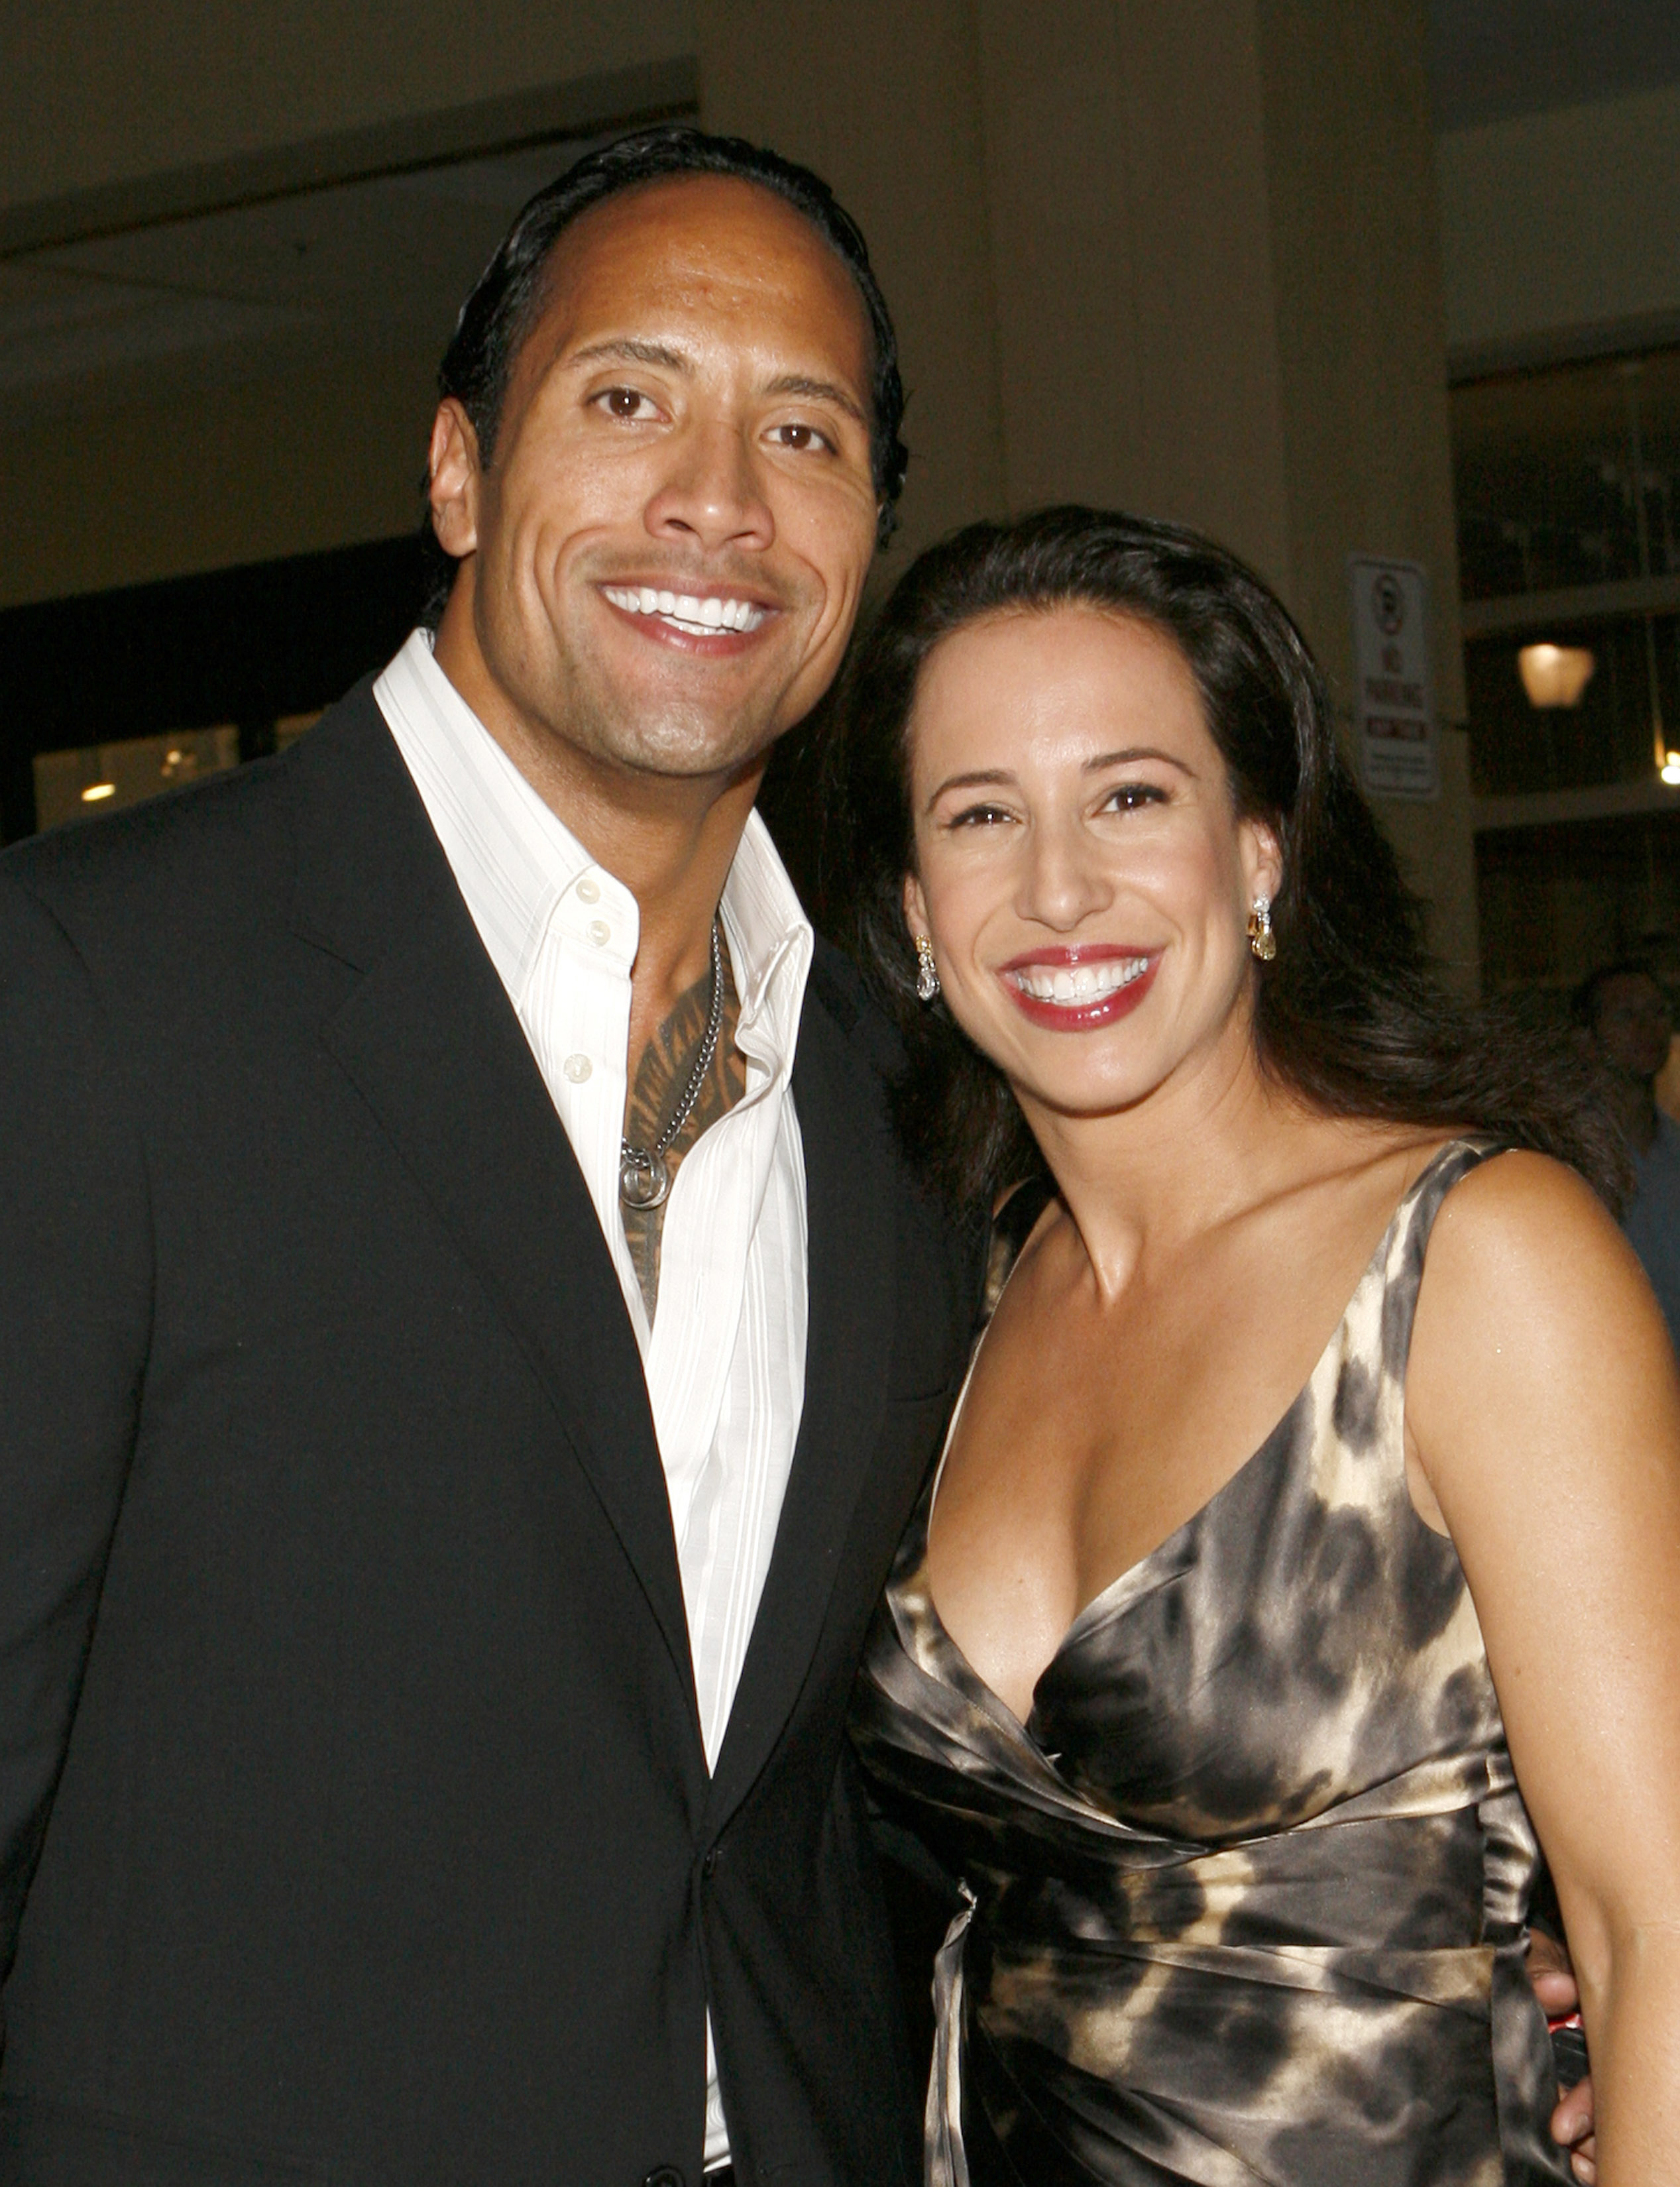 The Rock and Dany smiling together